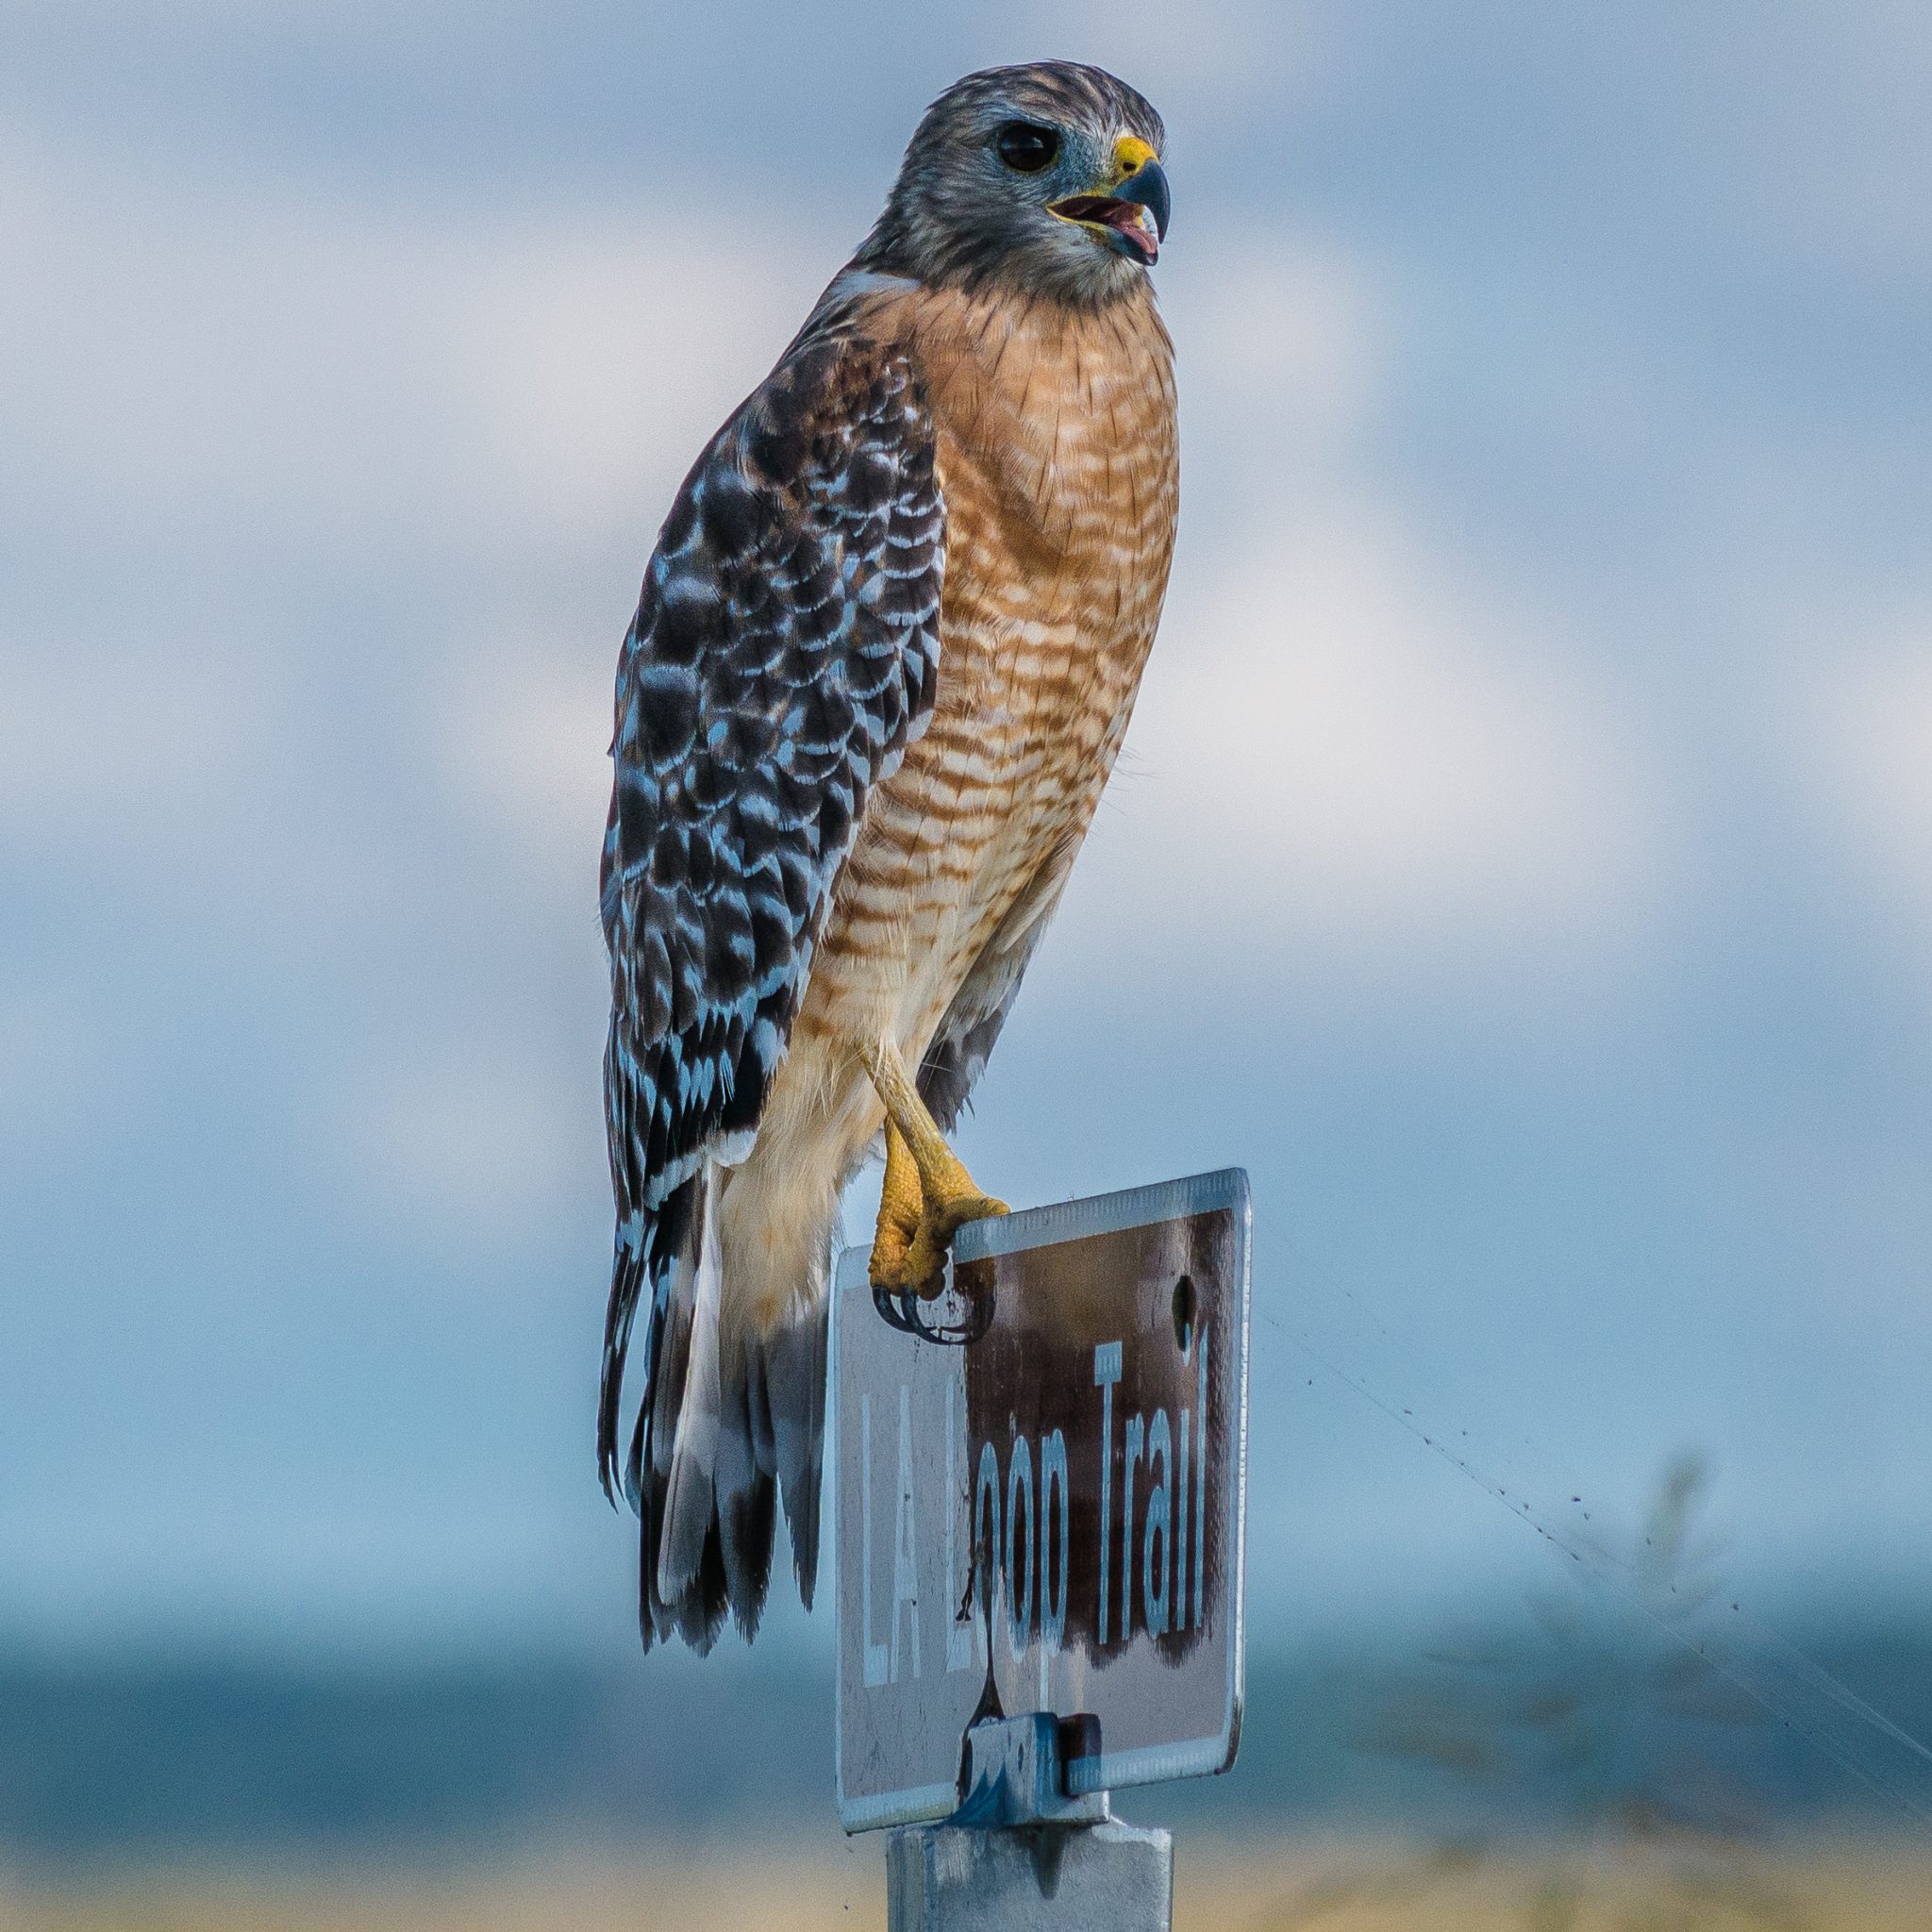 Red tail hawk sitting on a sign at Lake Apopka.